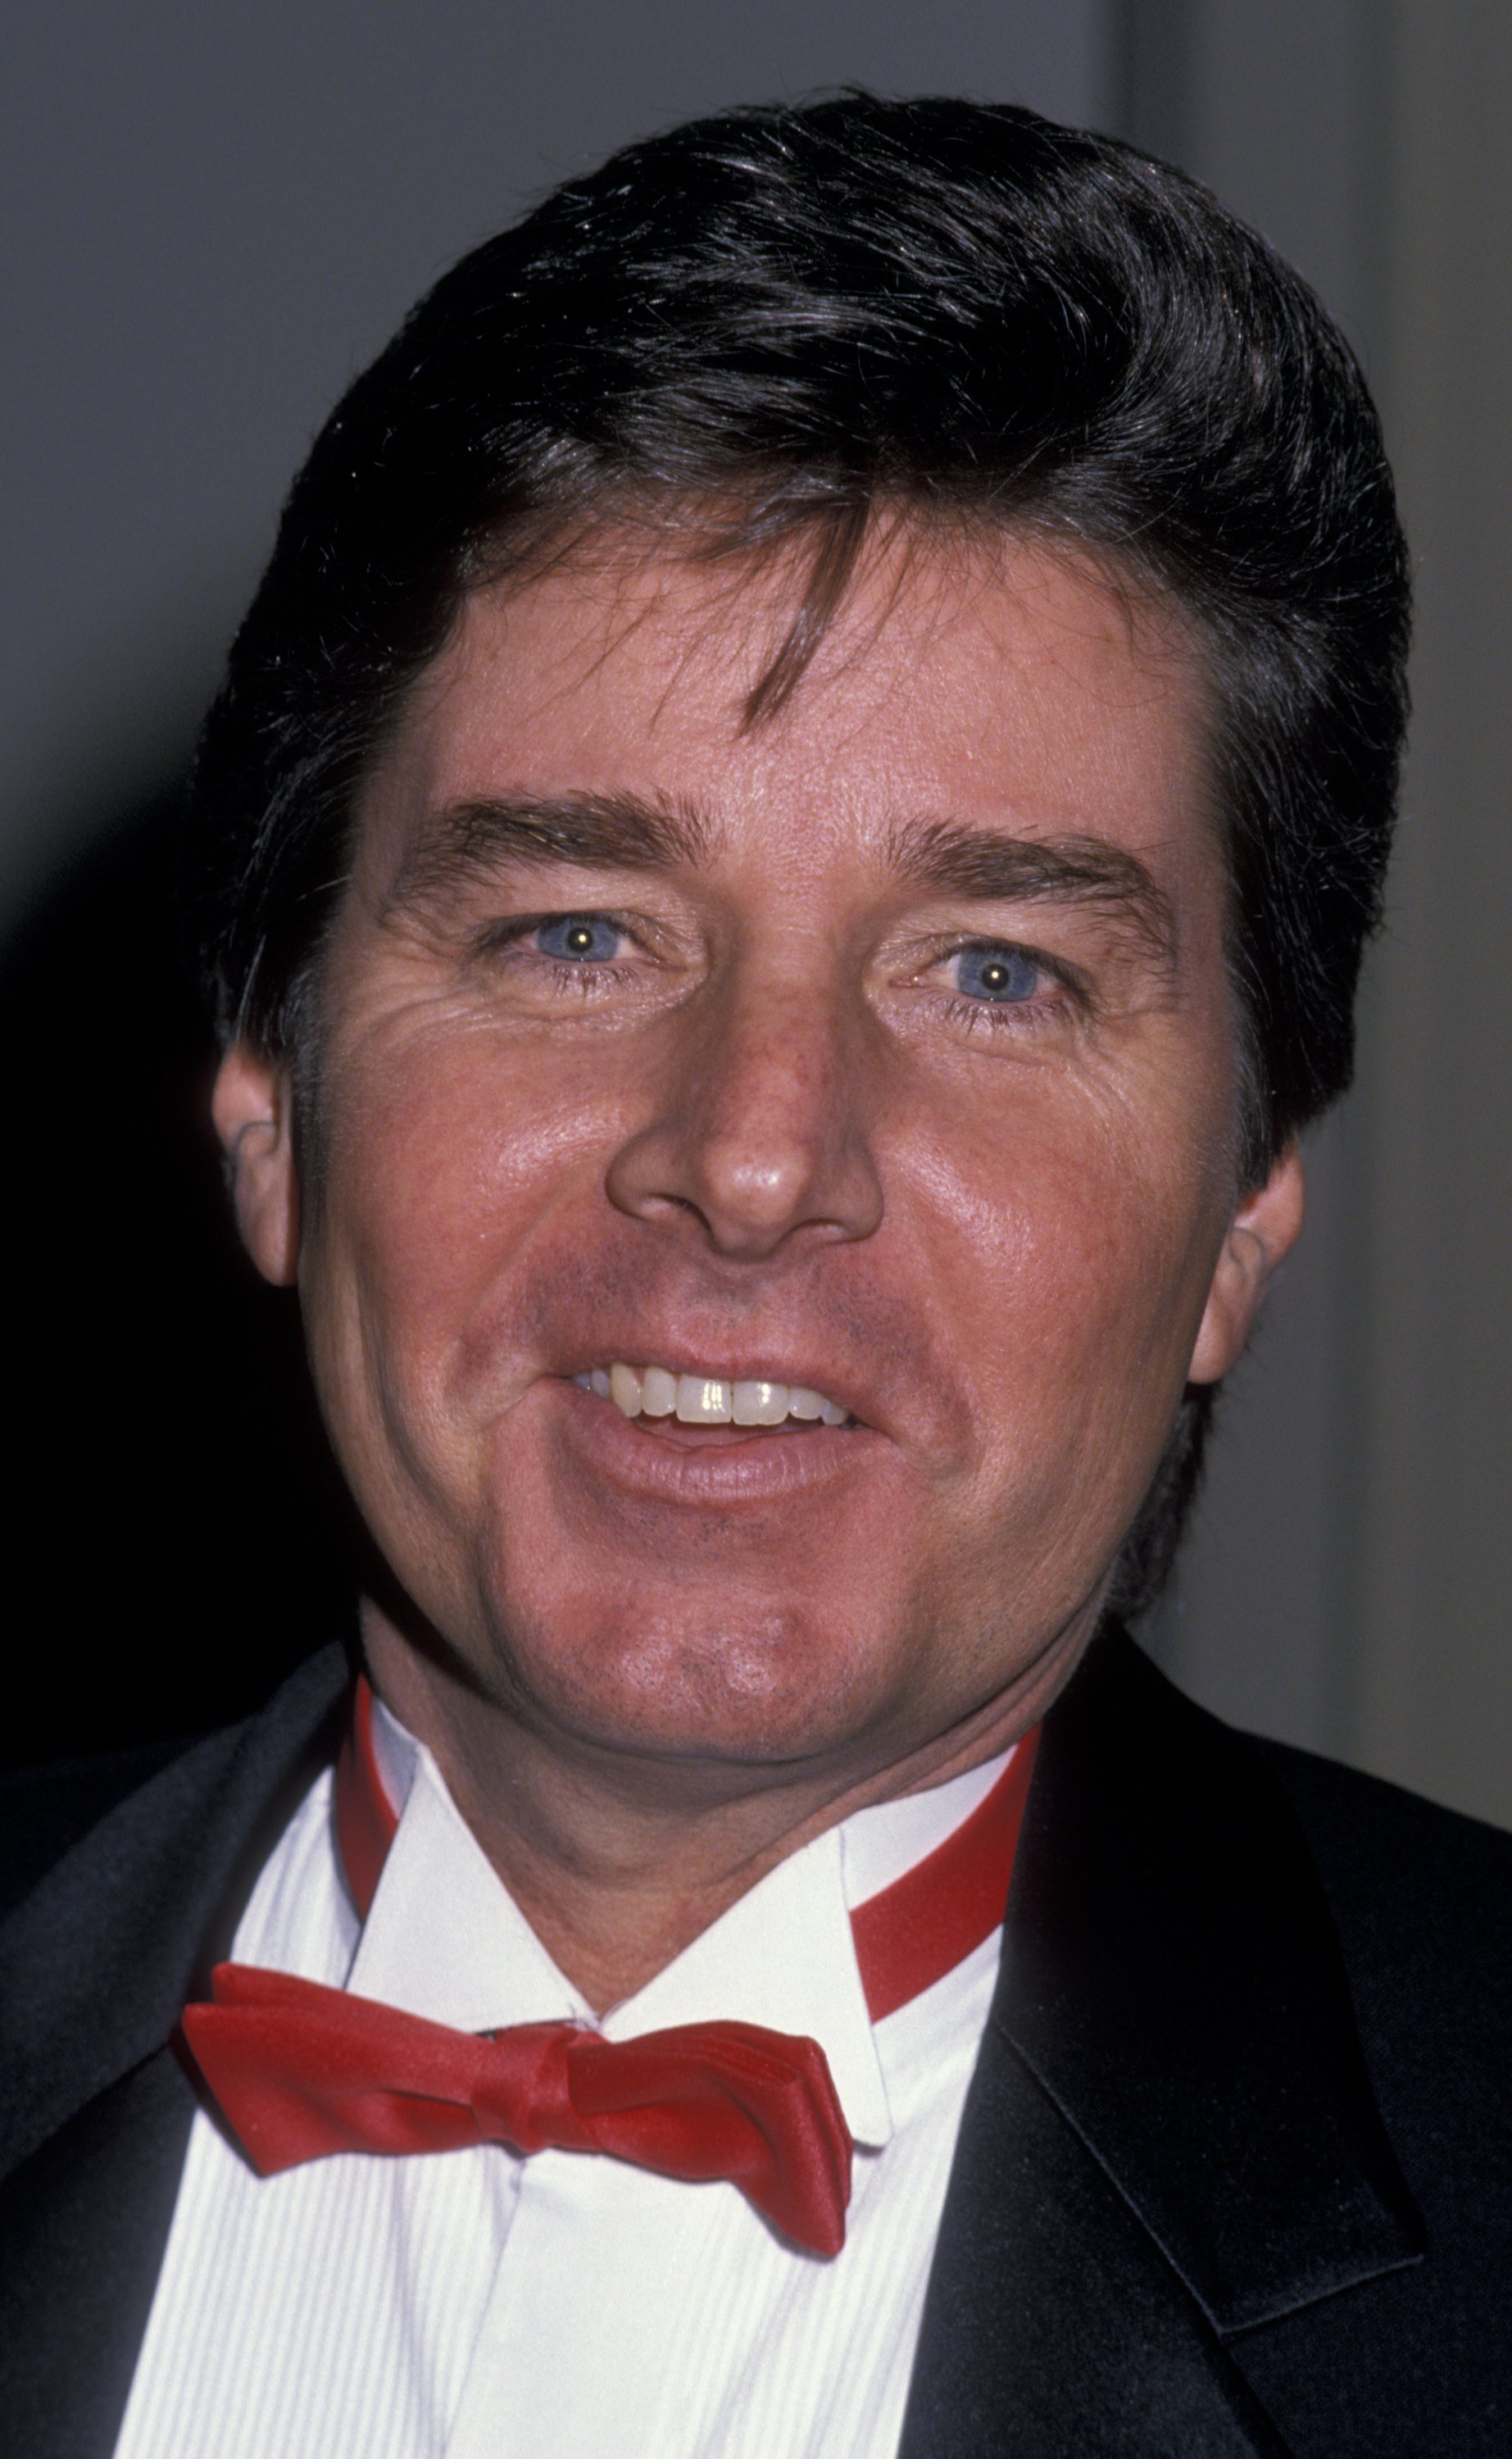 Bobby Sherman attending the 100th Episode Party for "Murder, She Wrote" at the Biltmore Hotel on February 12, 1989 in Los Angeles, California. / Source: Getty Images